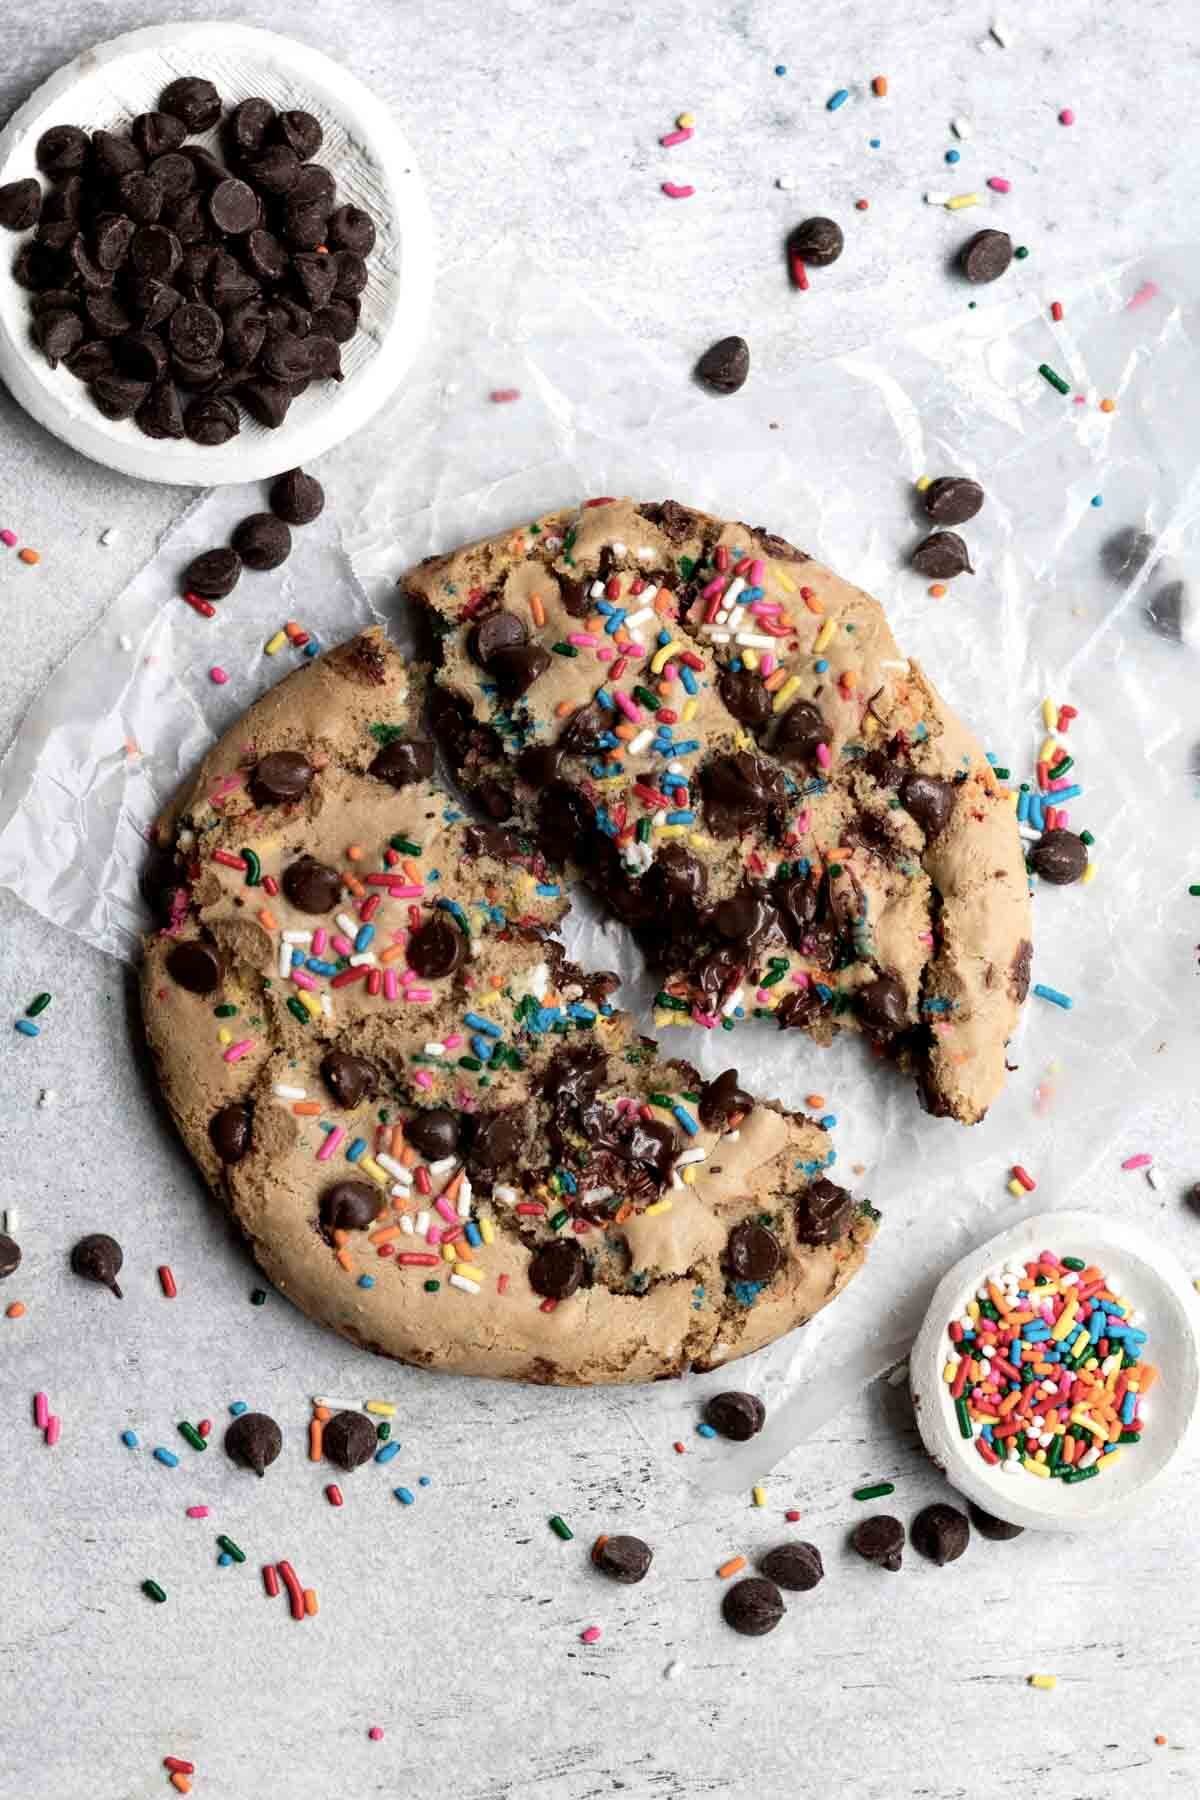 A cookie broken in half with bowls of chocolate chips and sprinkles.